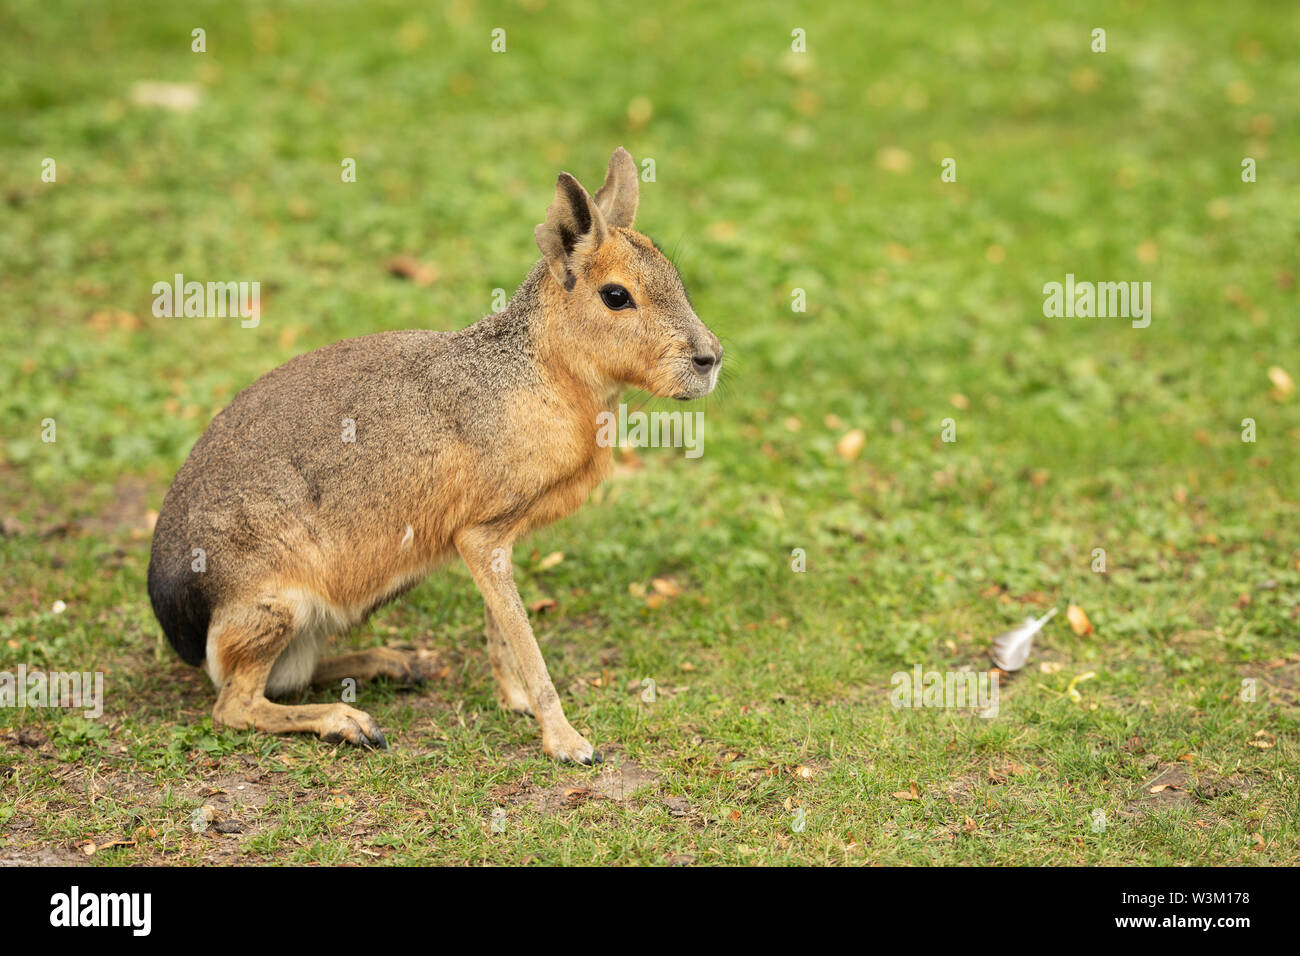 A Patagonian cavy (Dolichotis patagonum) sitting on the grass. Stock Photo